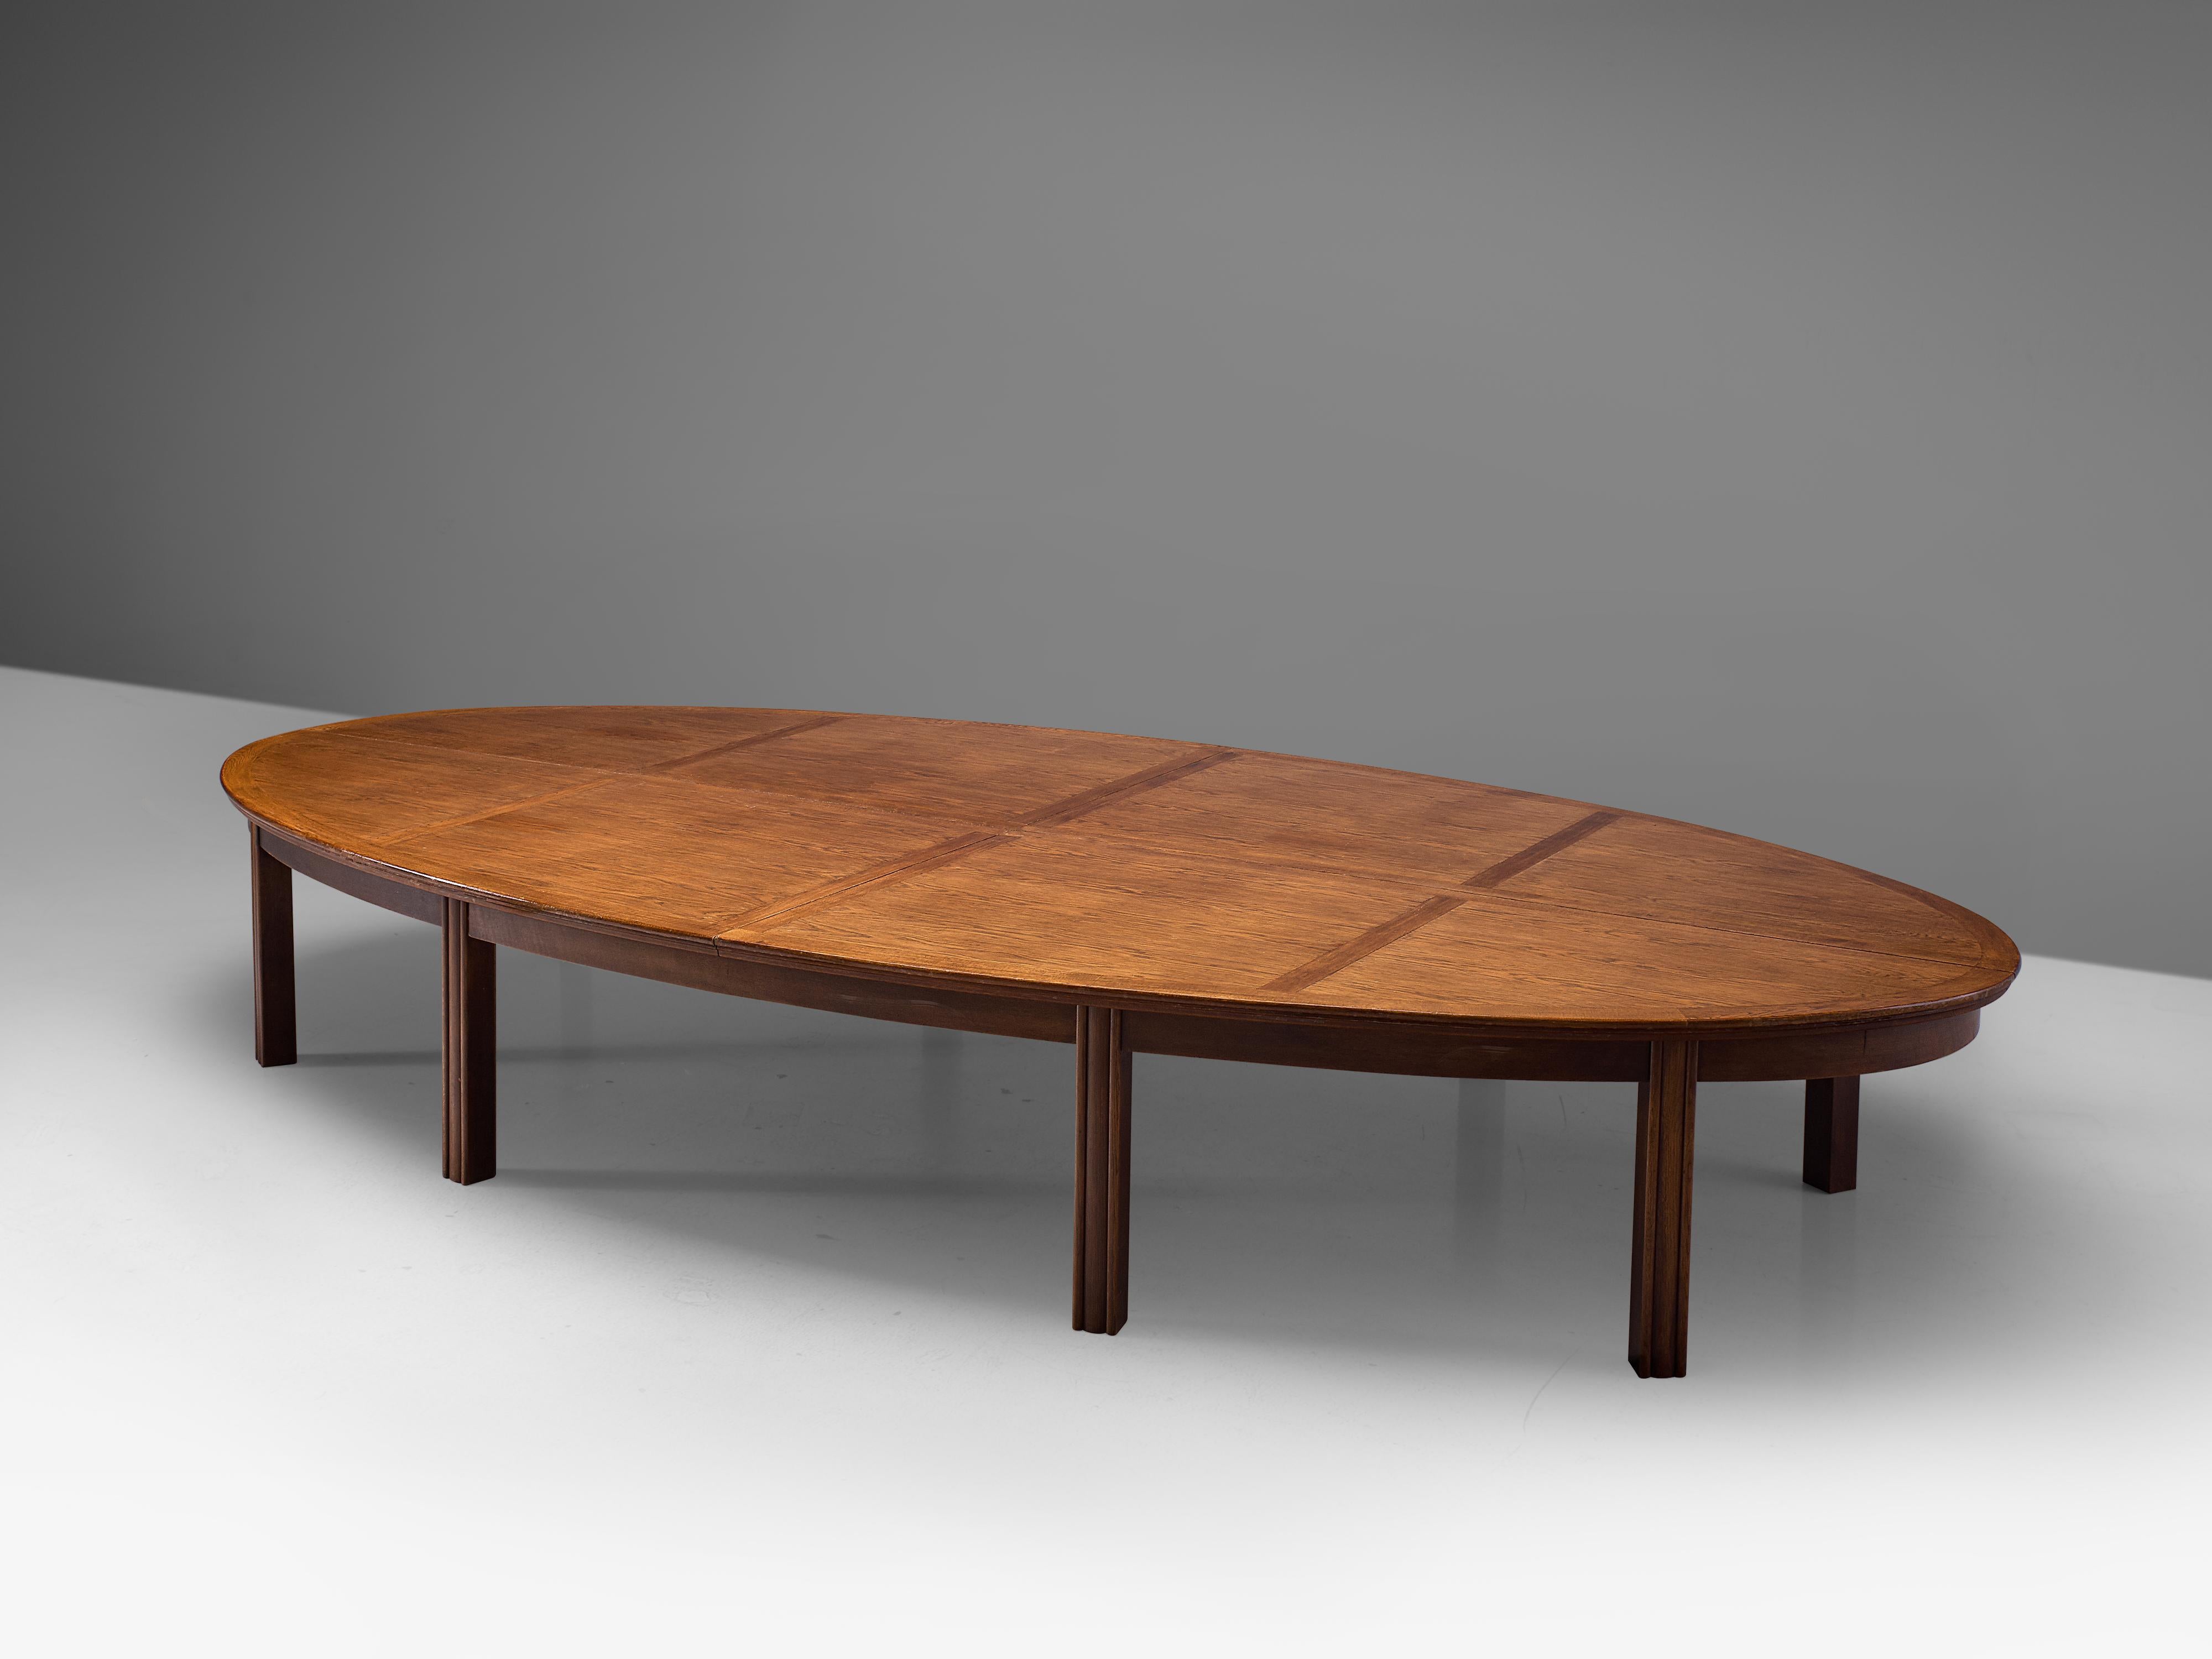 Conference table, oak, the Netherlands, 1950s

Beautiful aged large conference or dining table manufactured in the Netherlands in the 1950s. The wonderfully oval-shaped tabletop is inlayed with oak wood. A grid is created that structures the large